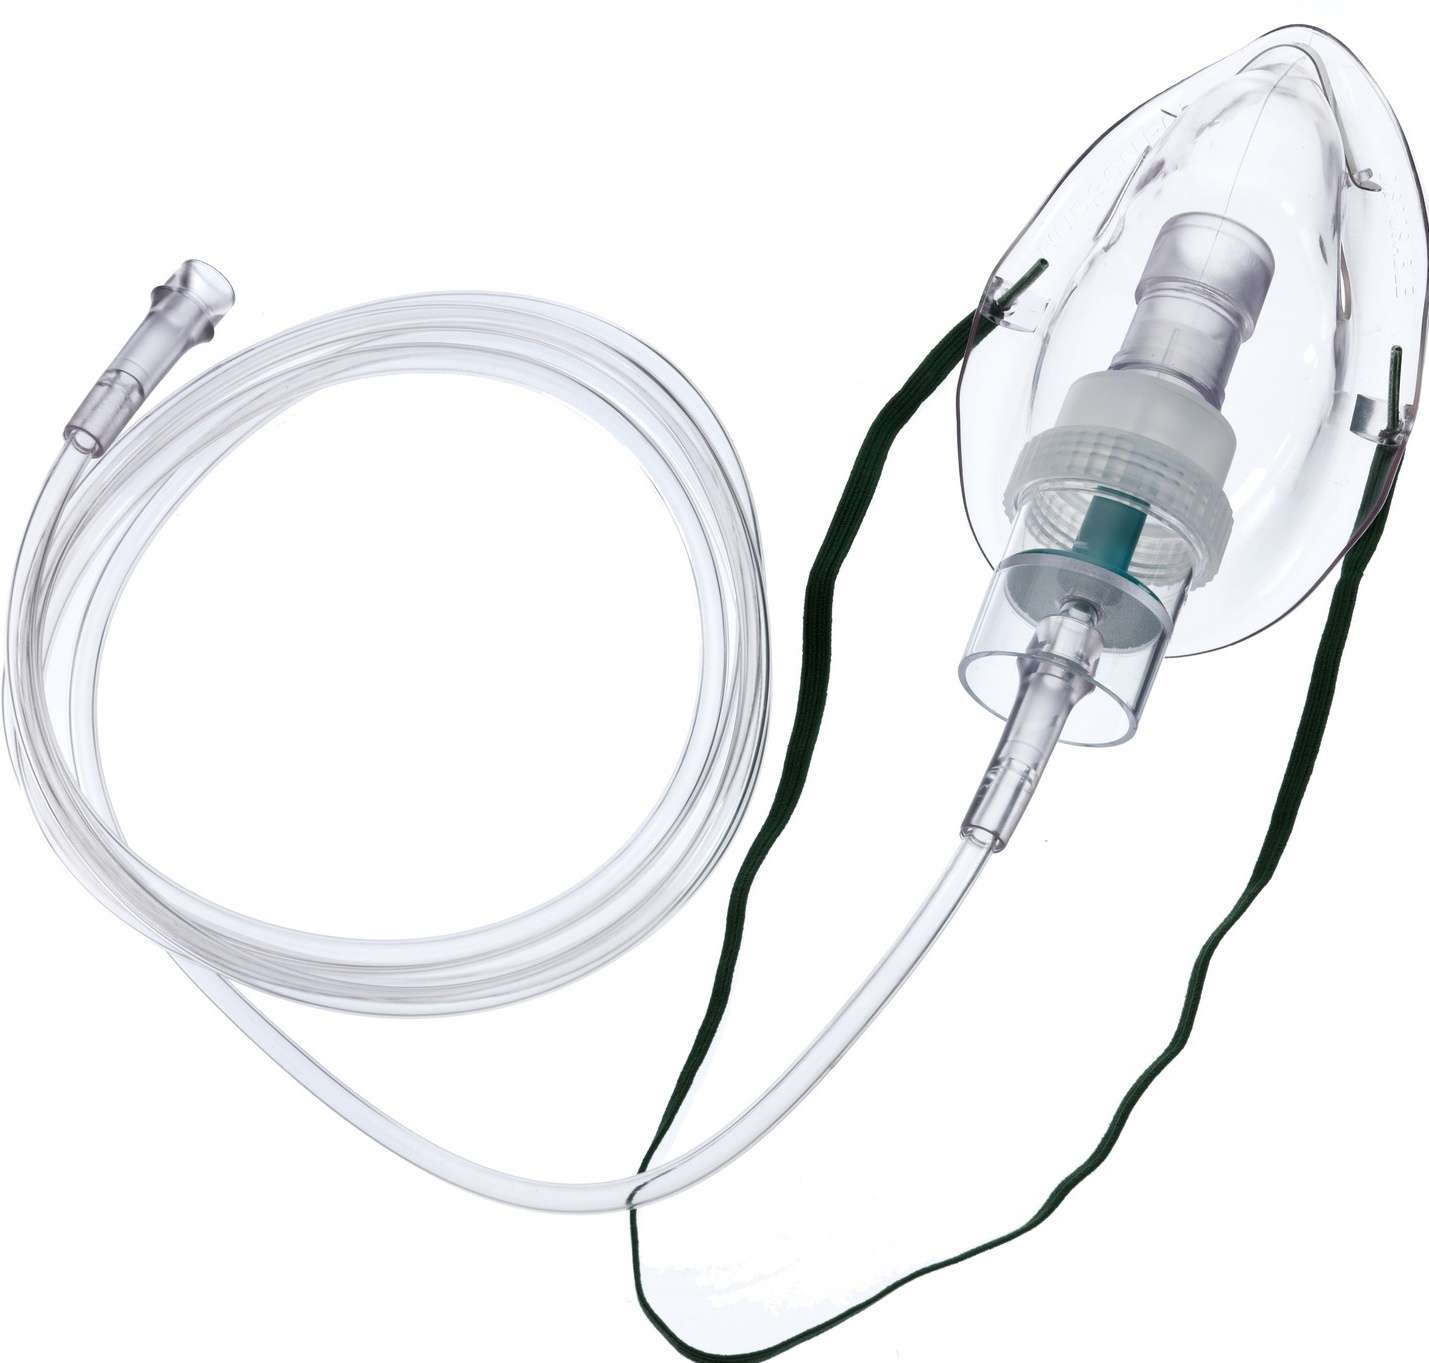 Hudson Micro Mist Nebuliser with 7ft tubing and Adult Mask